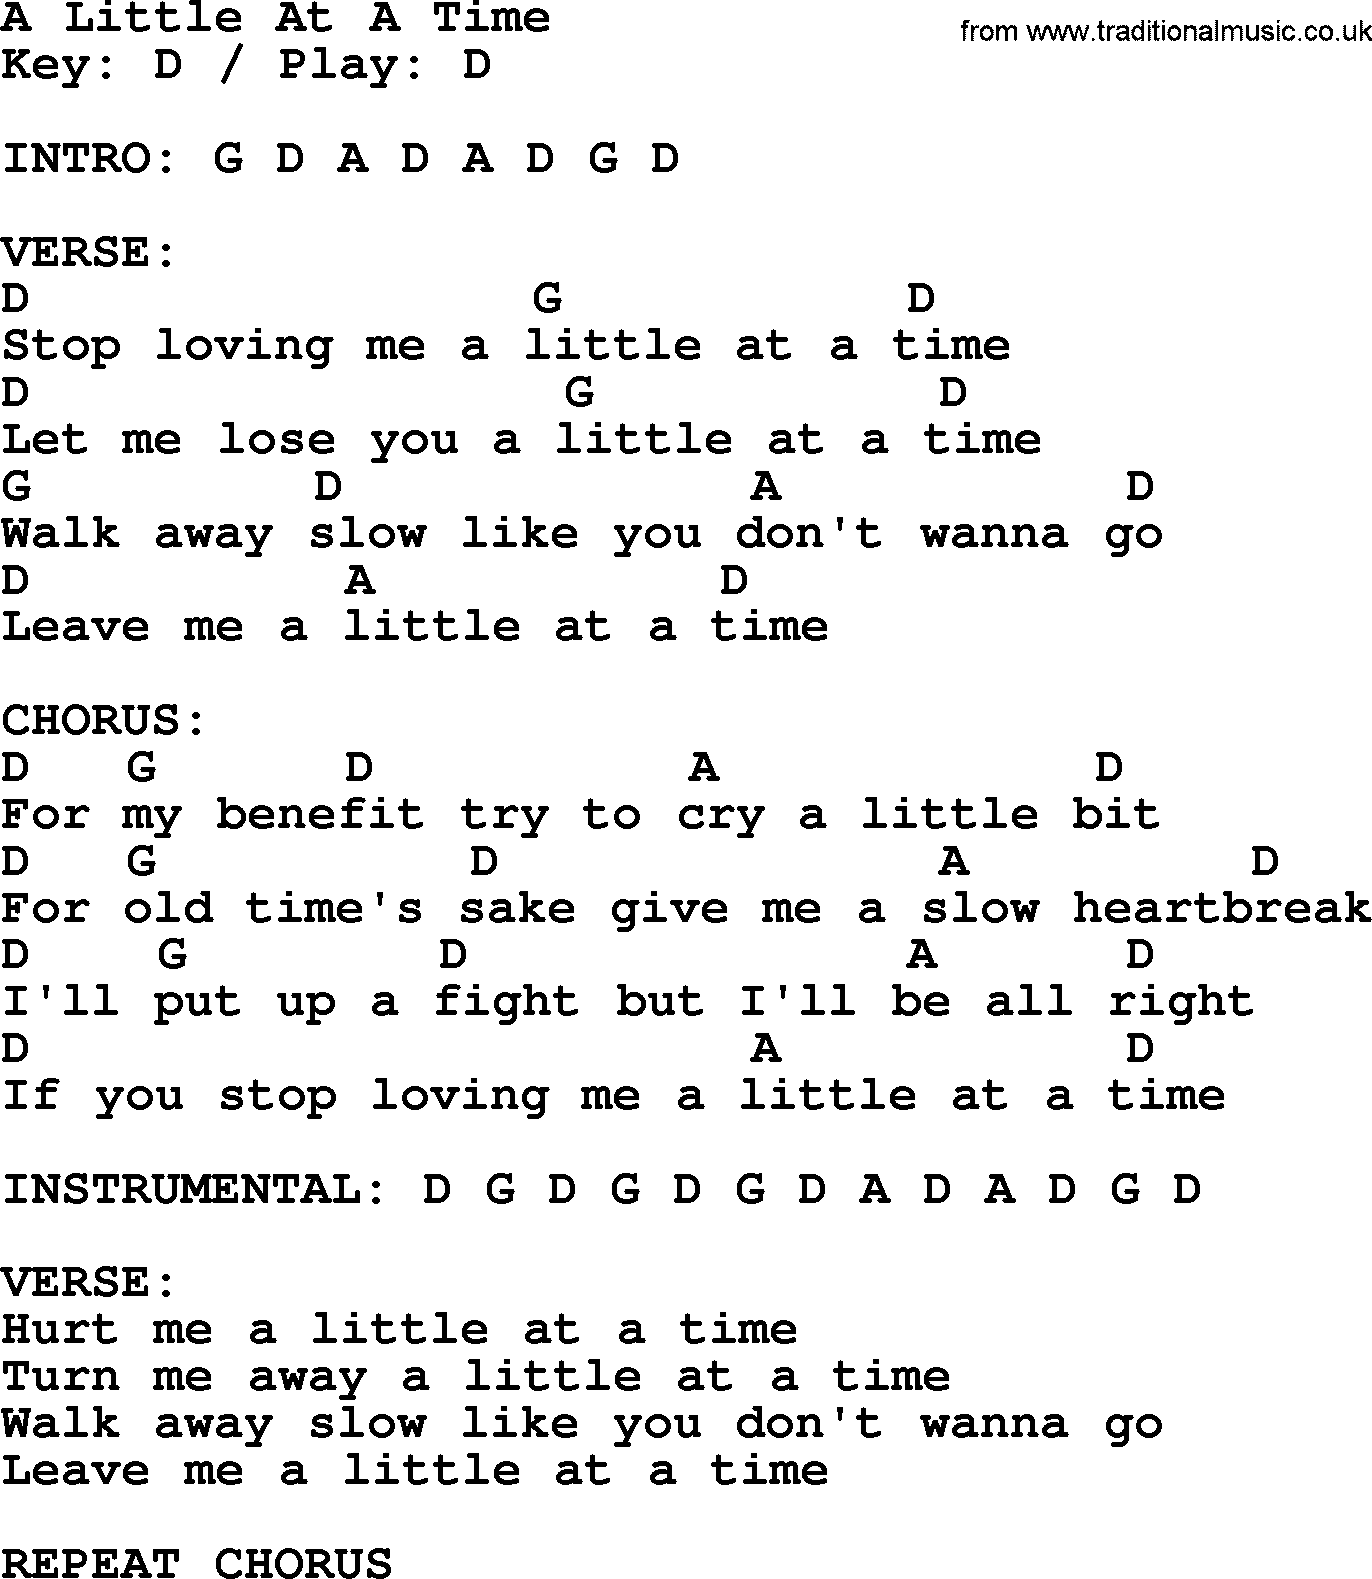 Johnny Cash song A Little At A Time, lyrics and chords